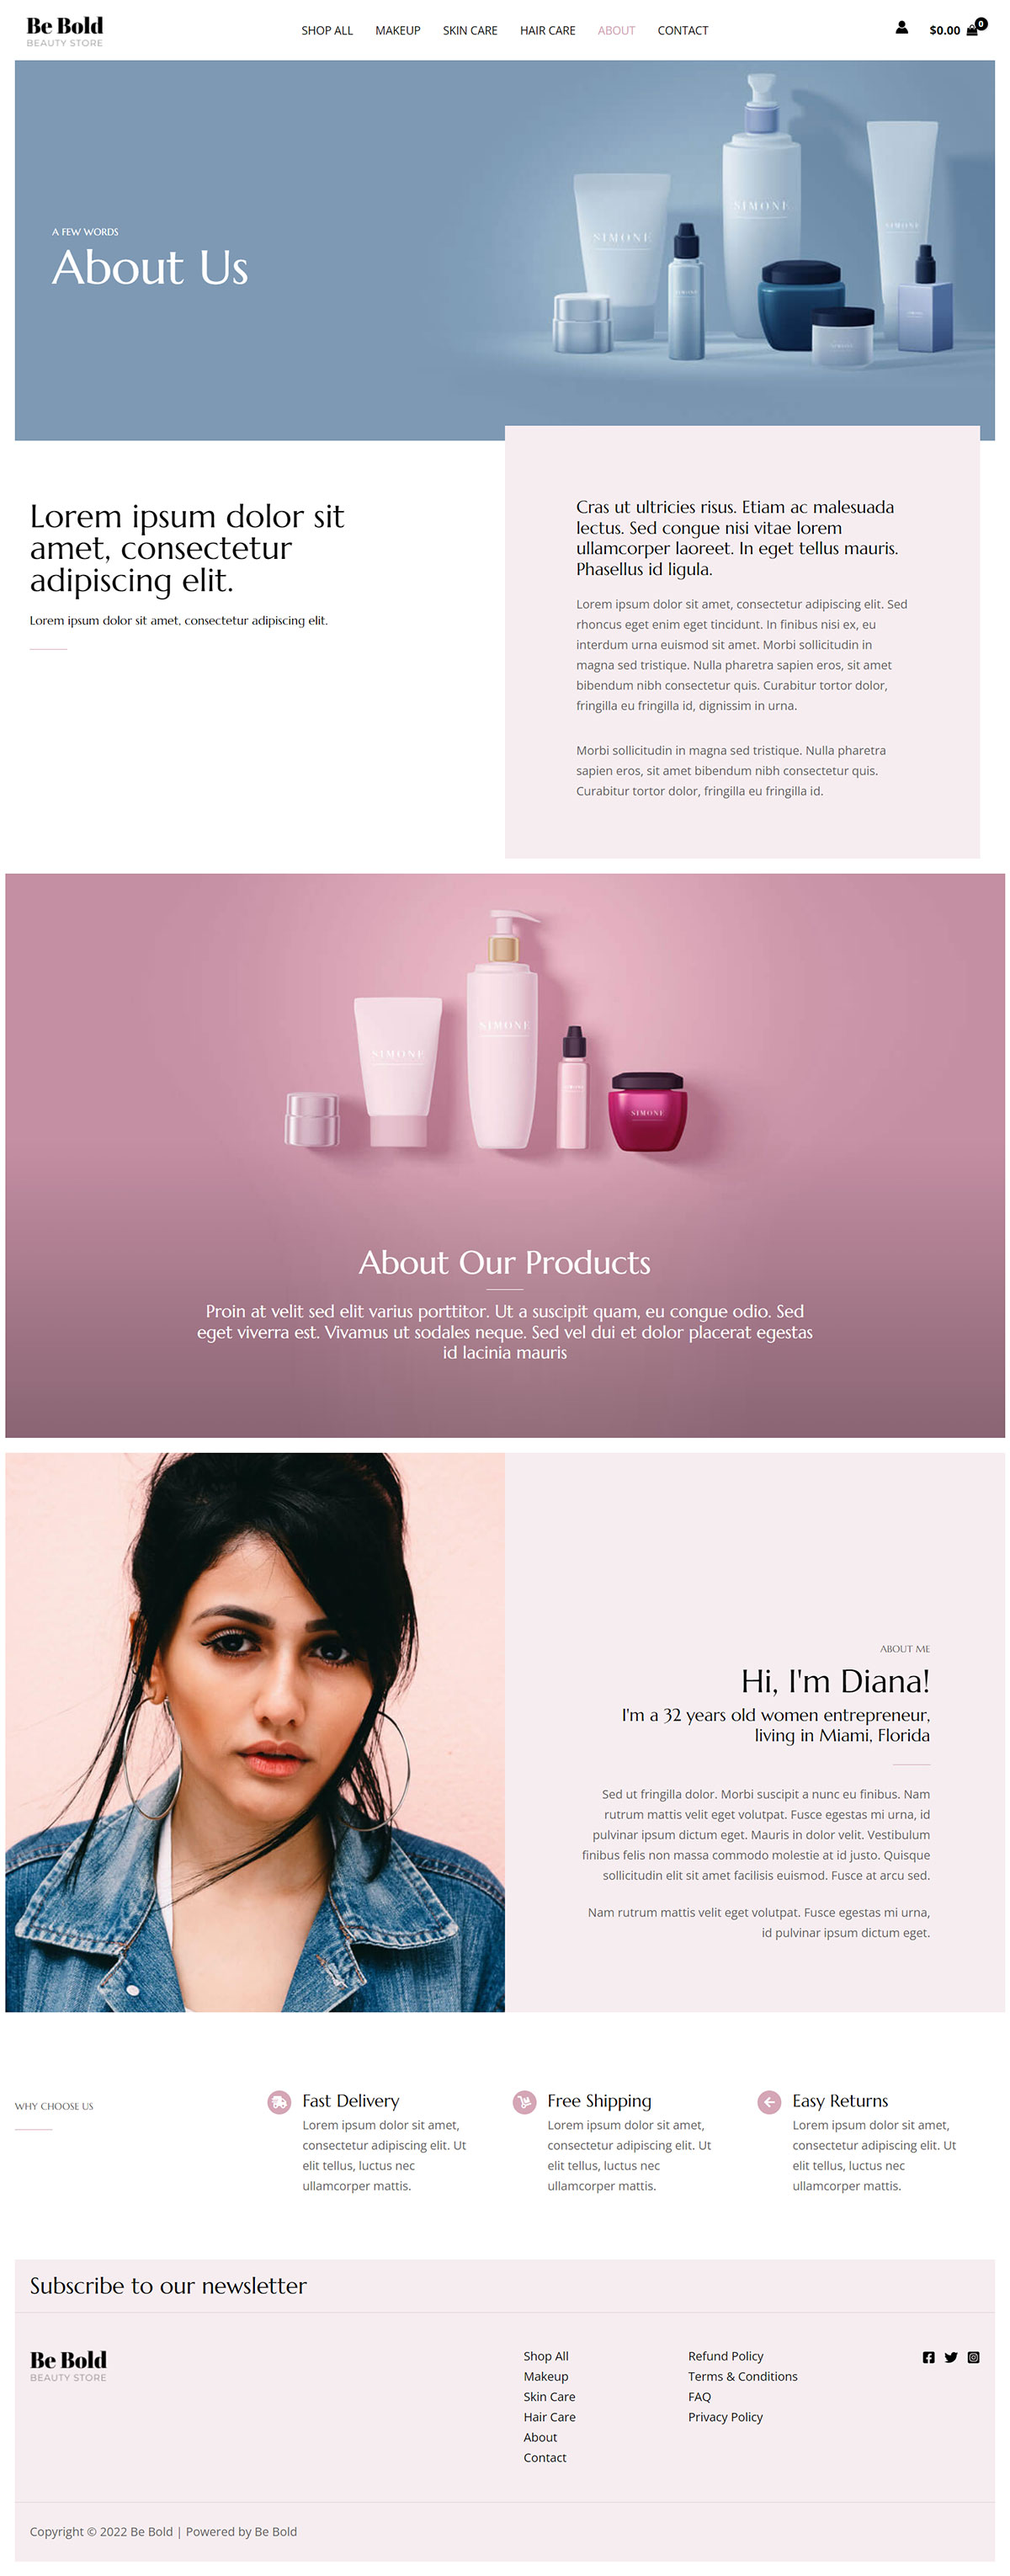 be-bold-beauty-store-04-about